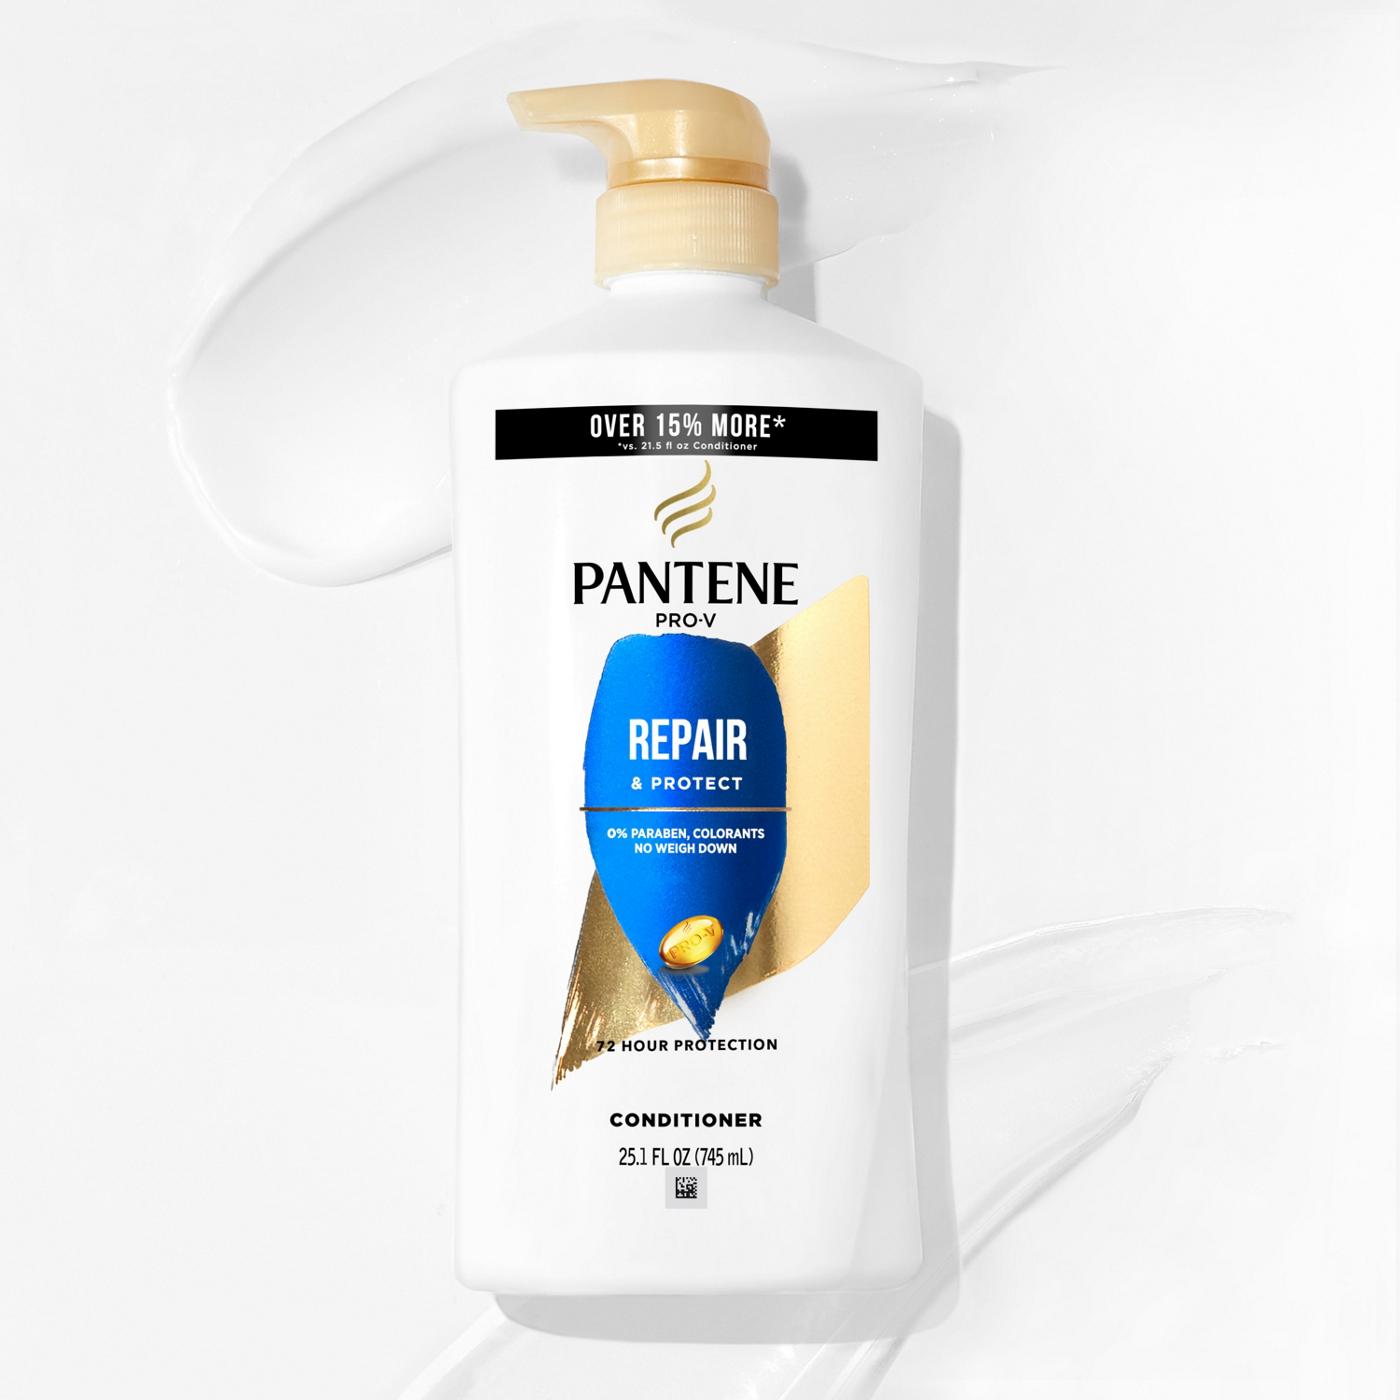 Pantene PRO-V Repair & Protect Conditioner; image 7 of 9